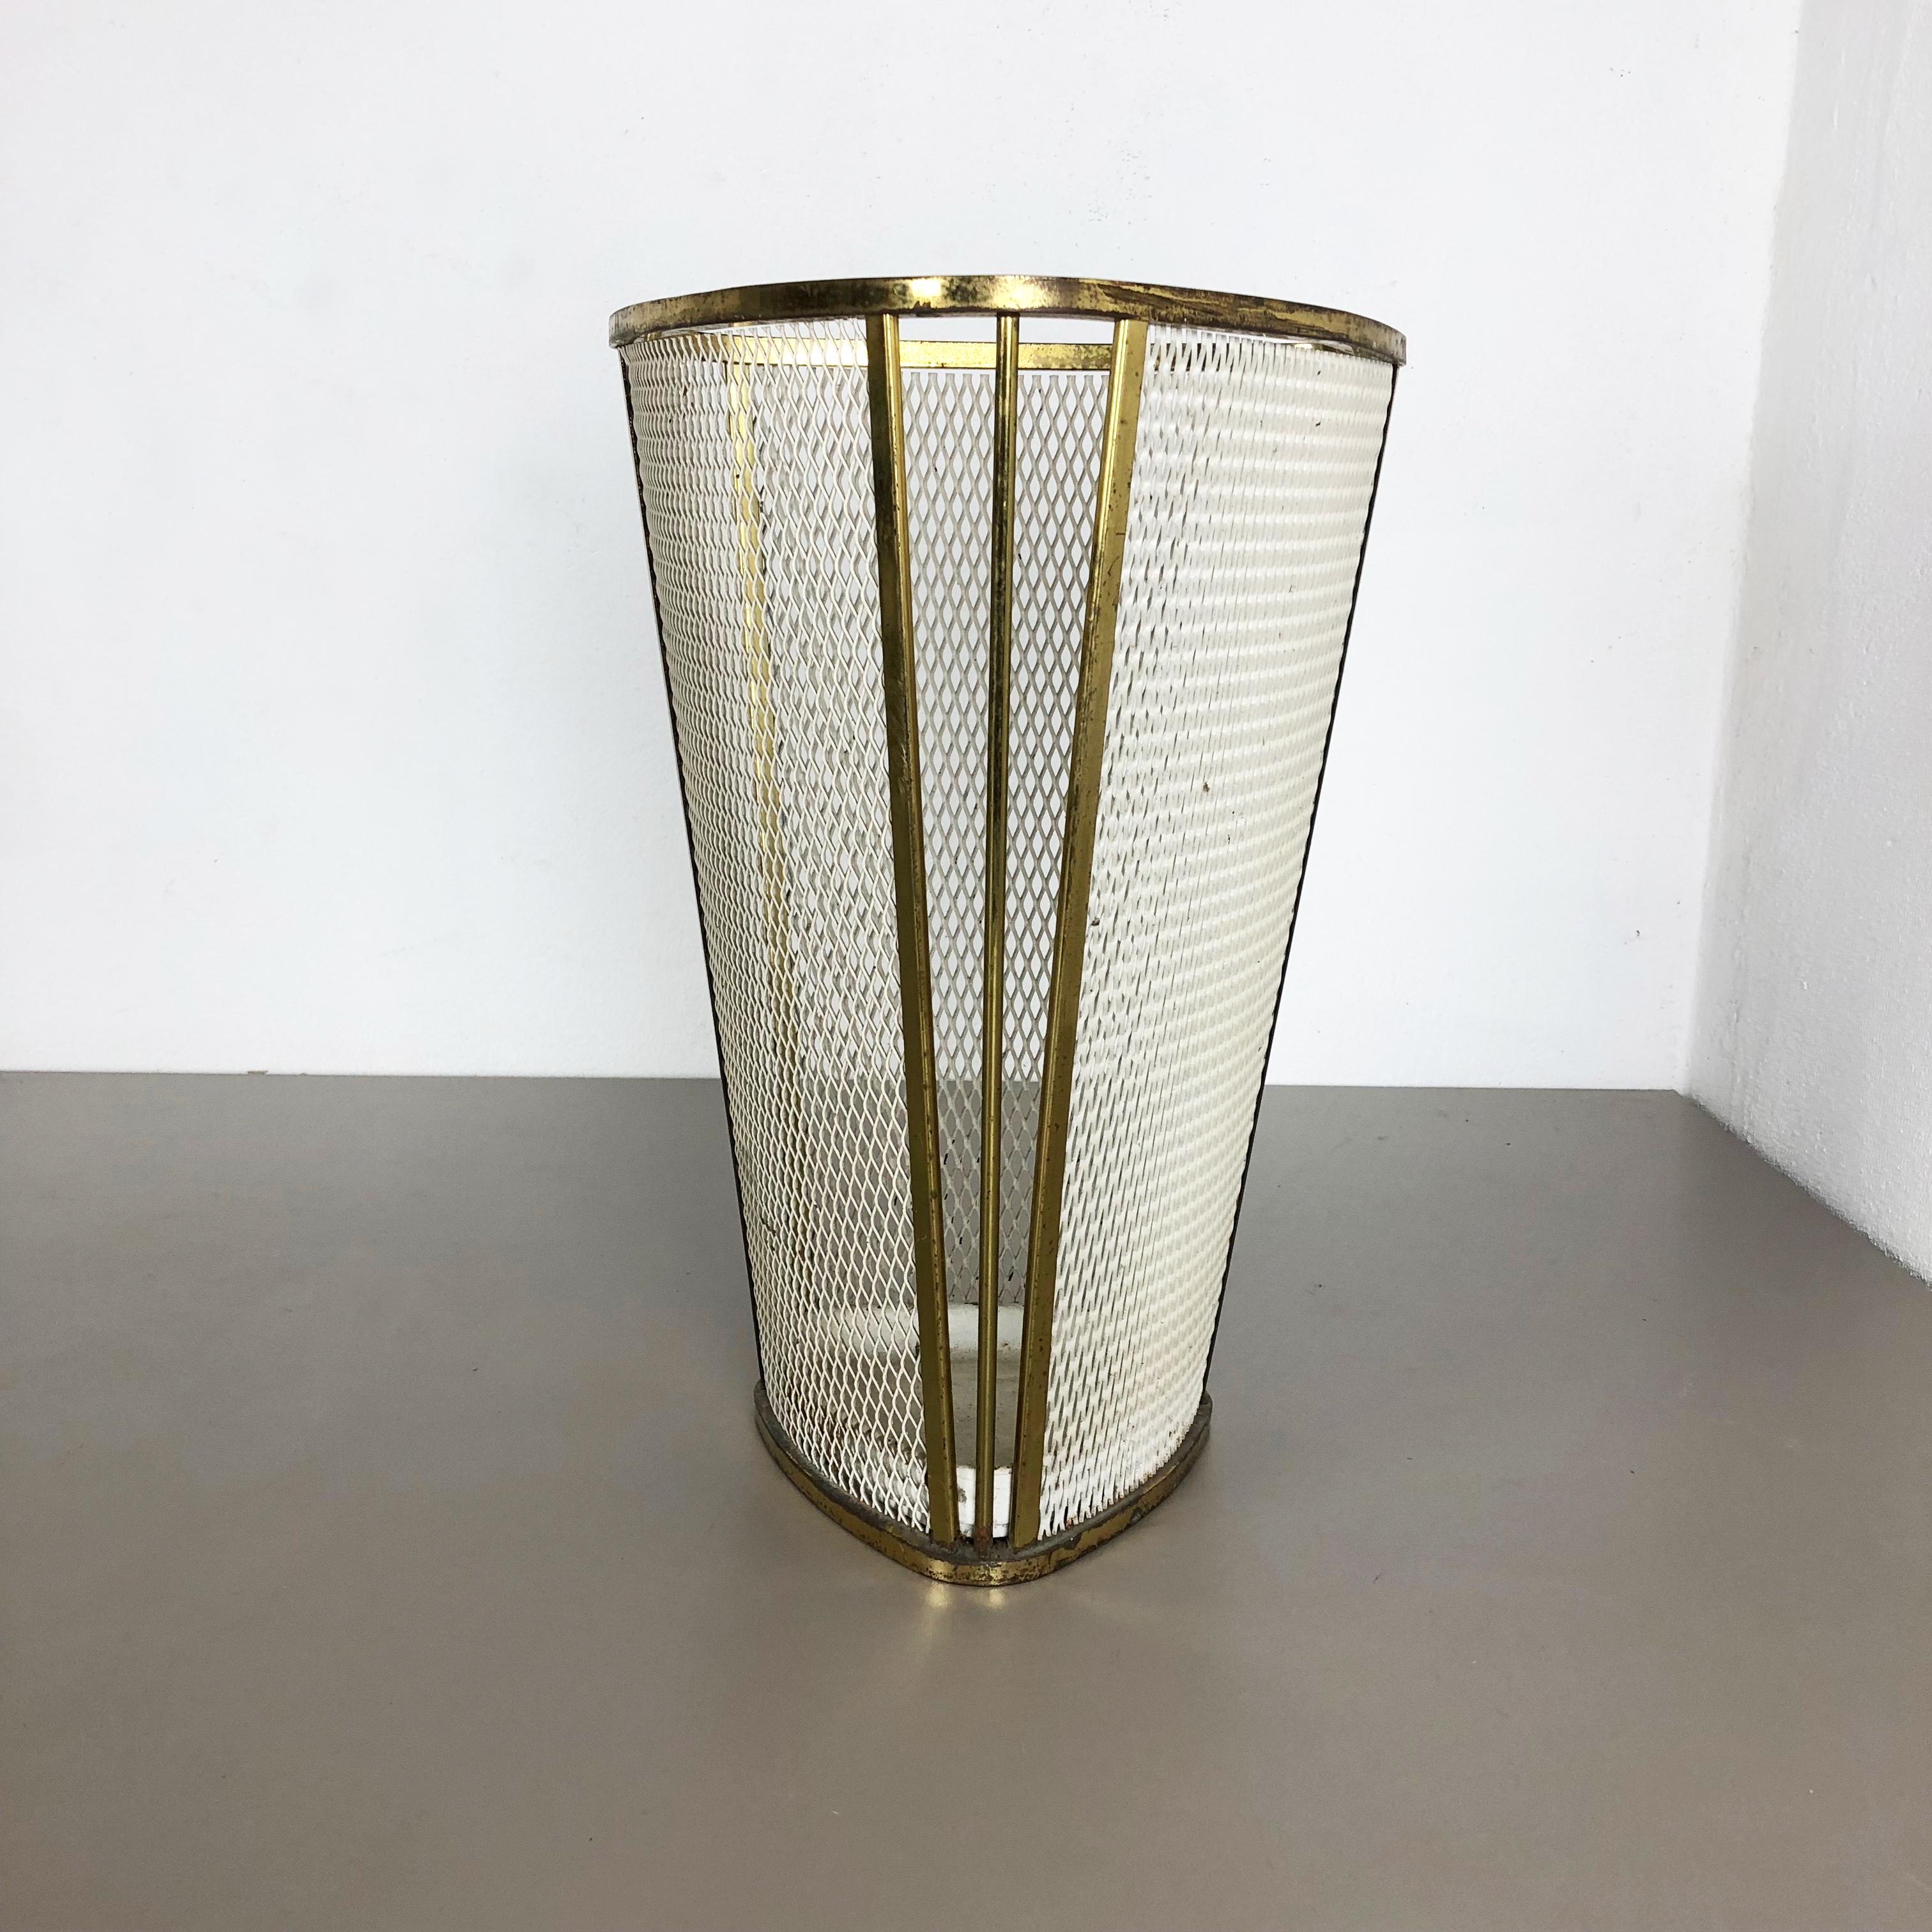 Article:

Umbrella stand in style of mategot



Origin:

France


Age:

1950s



Description:

this original vintage umbrella Stand was produced in the 1950s in France. it is made of solid metal in white lacquered tone with nice